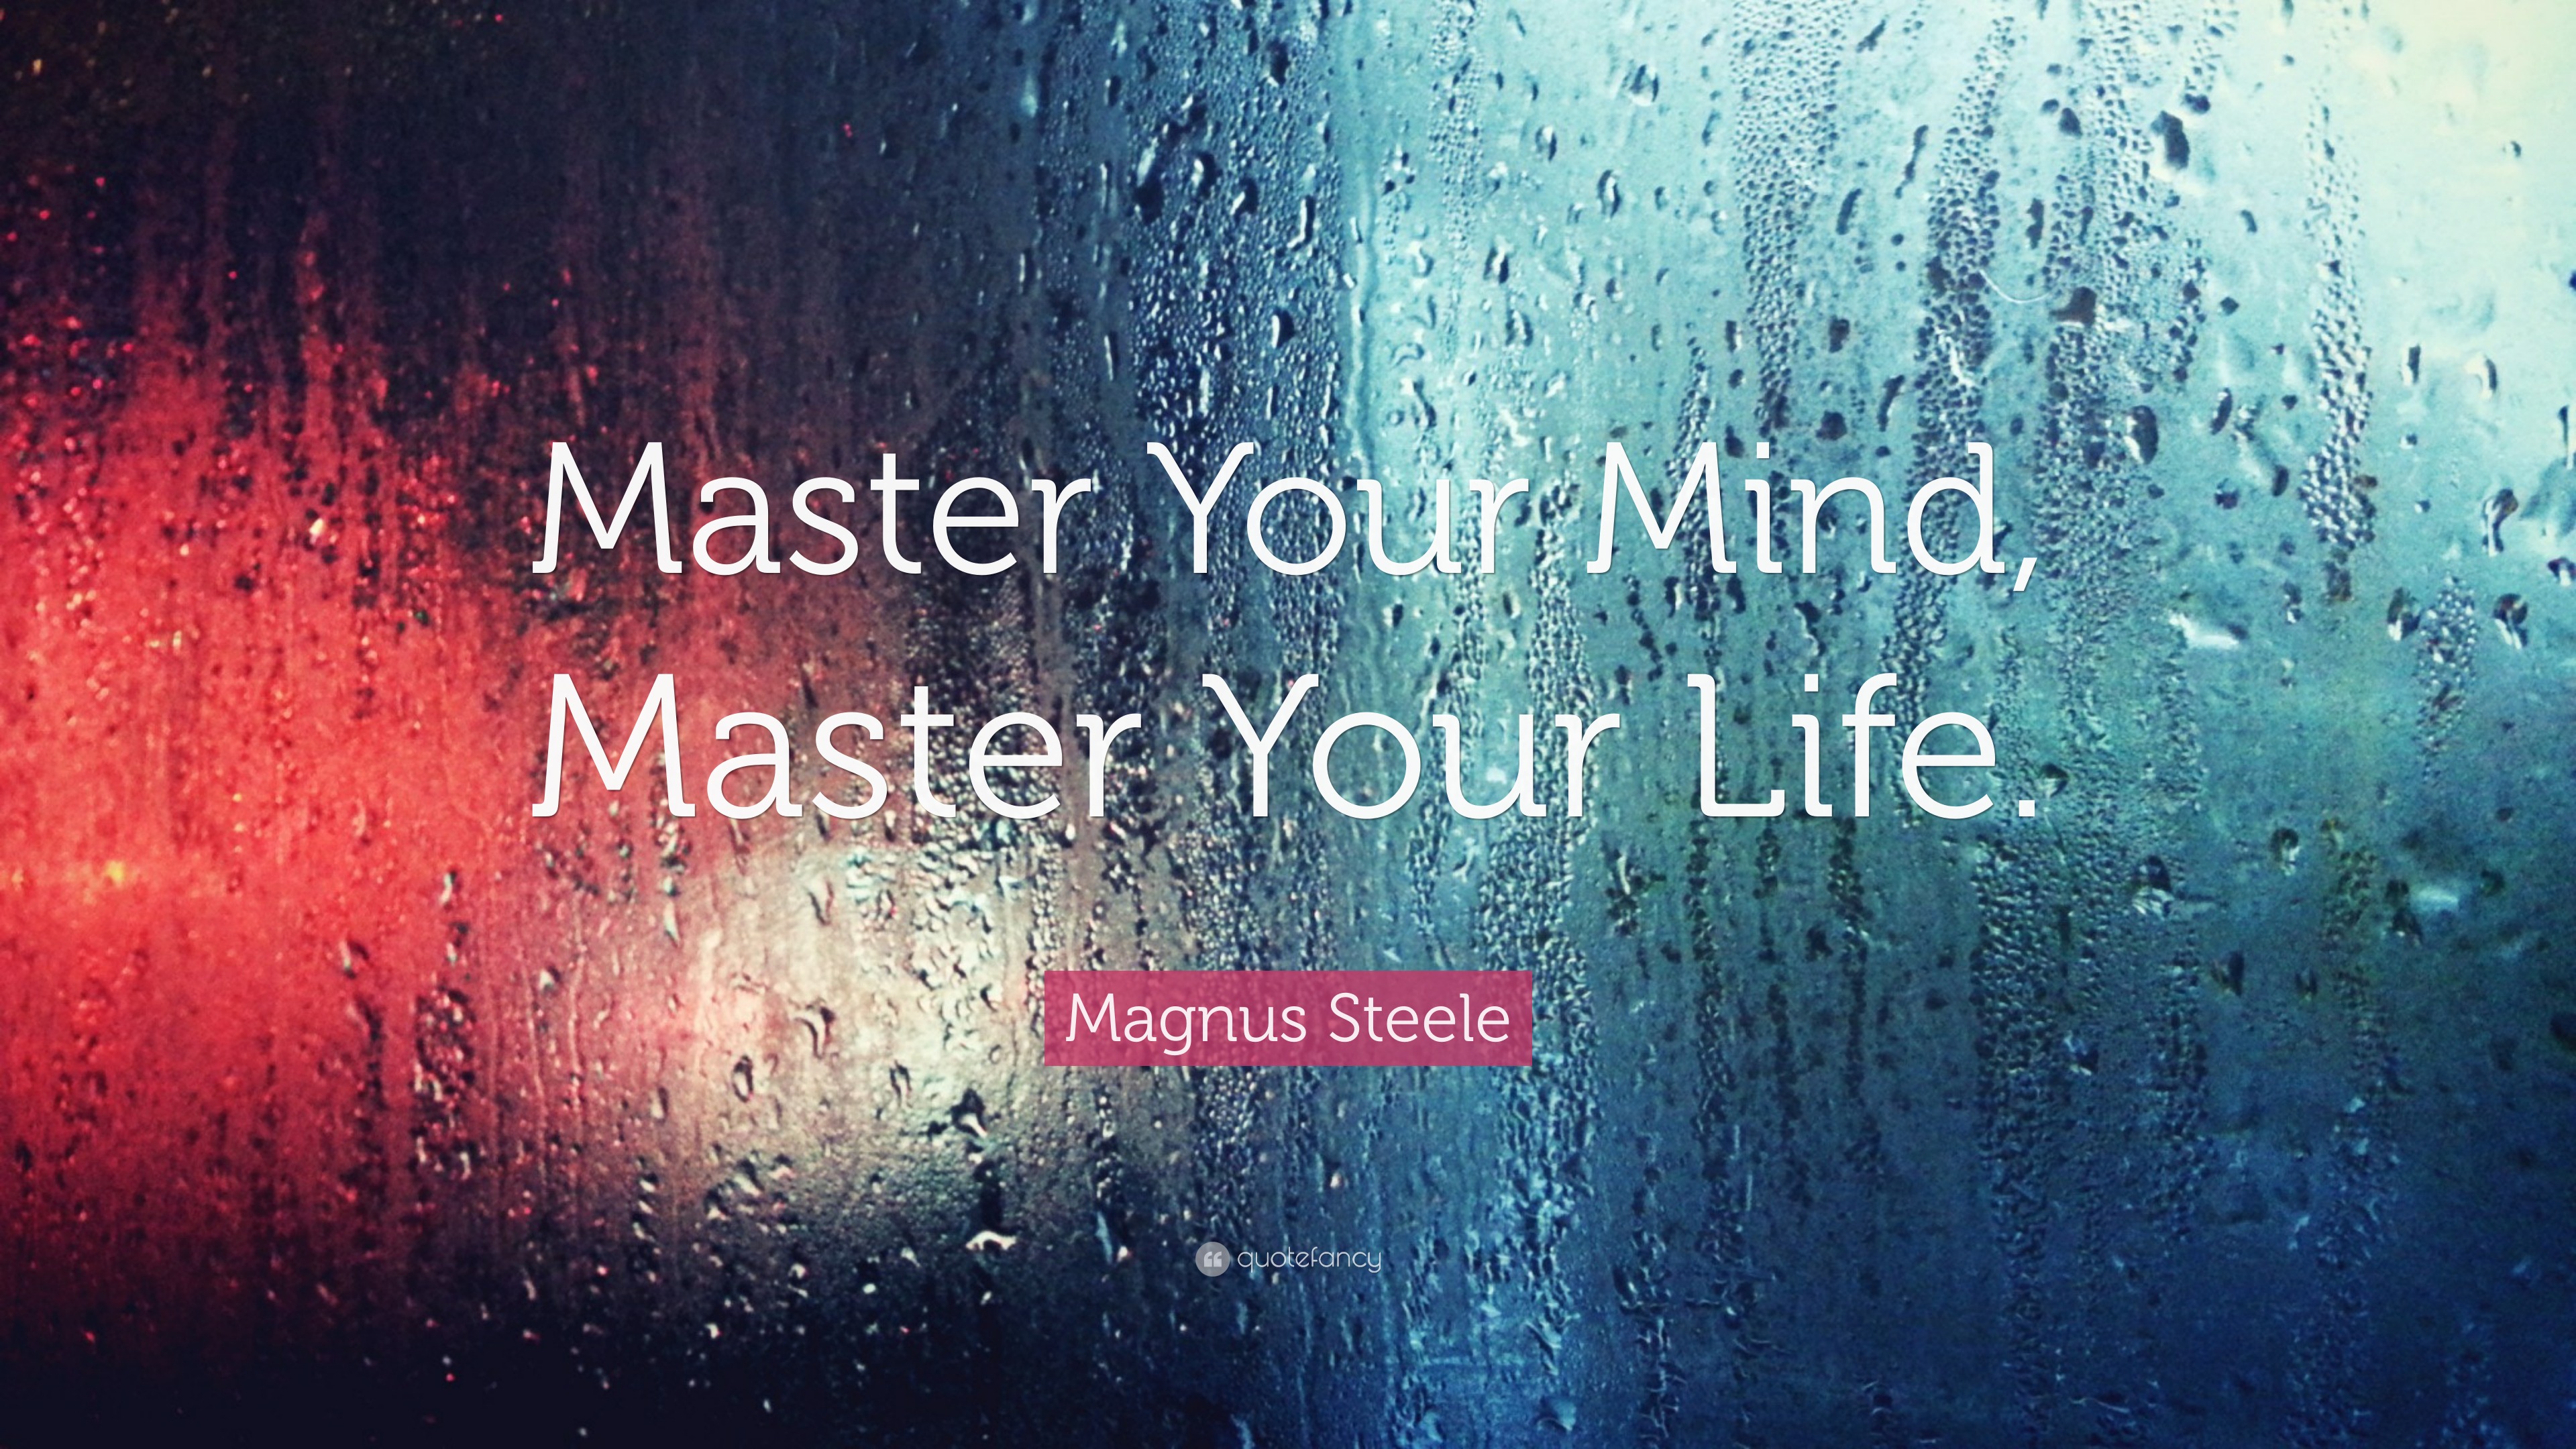 Master Your Mind, Master Your Life: 15 Mindset Hacks That Will Unleash Your  Full Potential Today eBook by Magnus Steele - EPUB Book